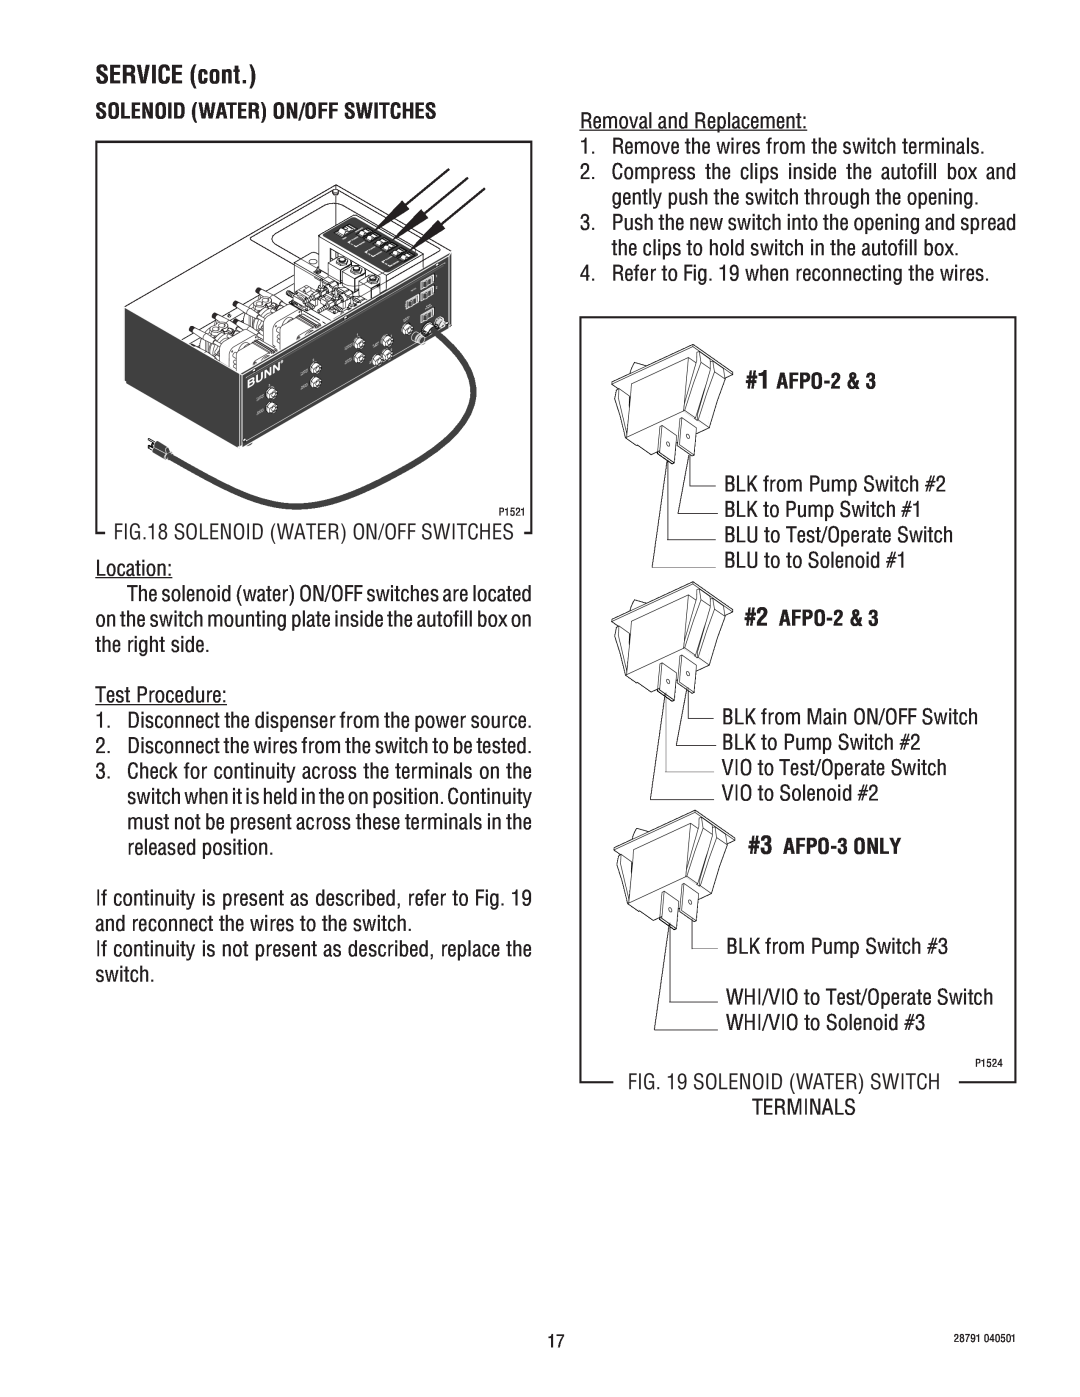 Bunn AFPO-2 SL service manual Solenoid Water On/Off Switches, SERVICE cont, #1 AFPO-2, #2 AFPO-2, #3 AFPO-3 ONLY 